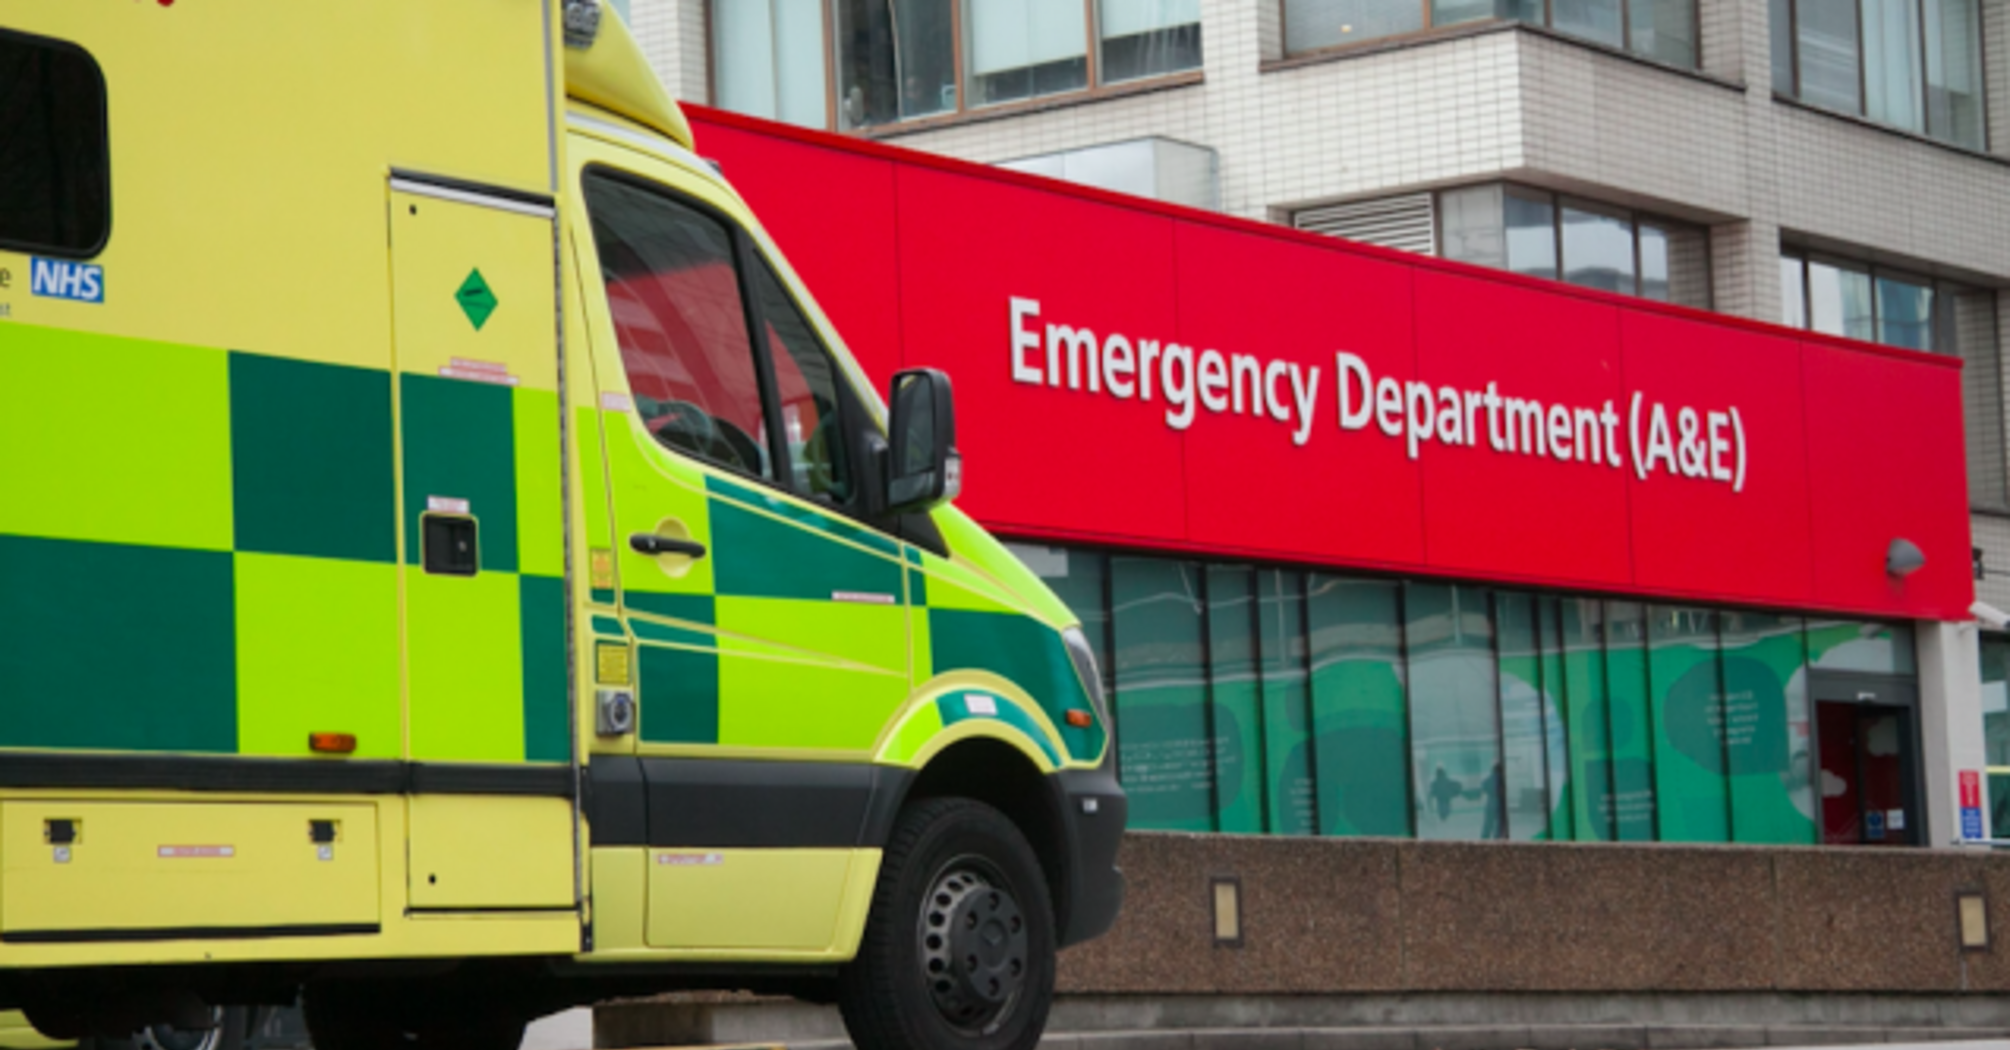 A woman called the emergency service more than 2000 times